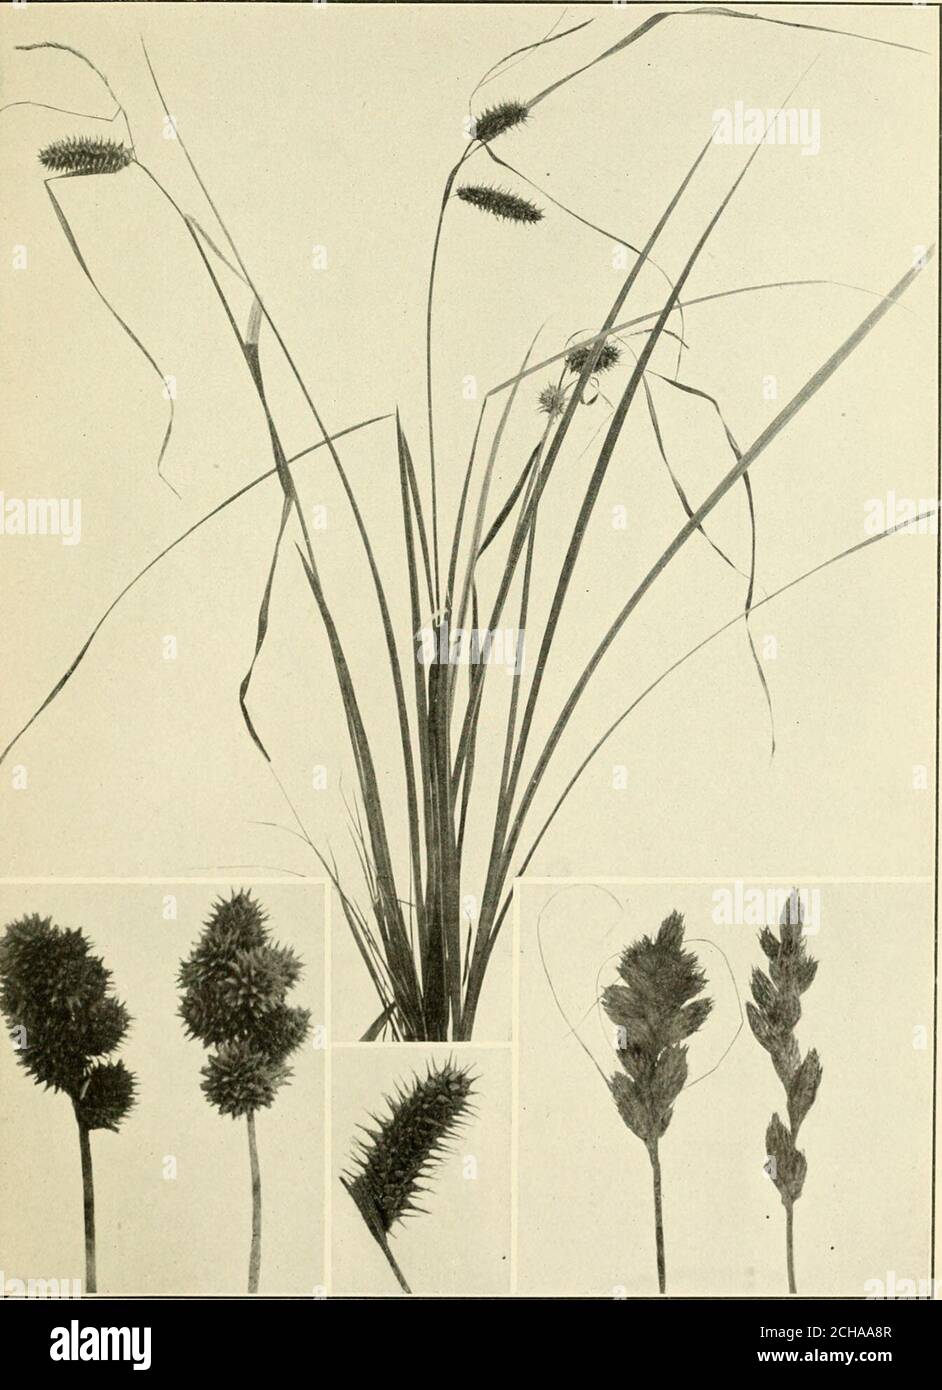 . The book of grasses : an illustrated guide to the common grasses, and the most common of the rushes and sedges . few-flowered, fertilespikes above which the nar-row staminate spike is borneon a slender stalk. The HopSedge {Carex lupulina) is stout,with broad, light green leavesand two to six densely floweredfertile spikes which are usuallysessile, though the lower spikeis often borne on a short ped-uncle. The Porcupine Sedge{Carex hystricina) bears nar-row, yellowish green leavesand one to four densely flow-ered pistillate spikes. Thelong, rough point of the scaleis a distinguishing feature Stock Photo